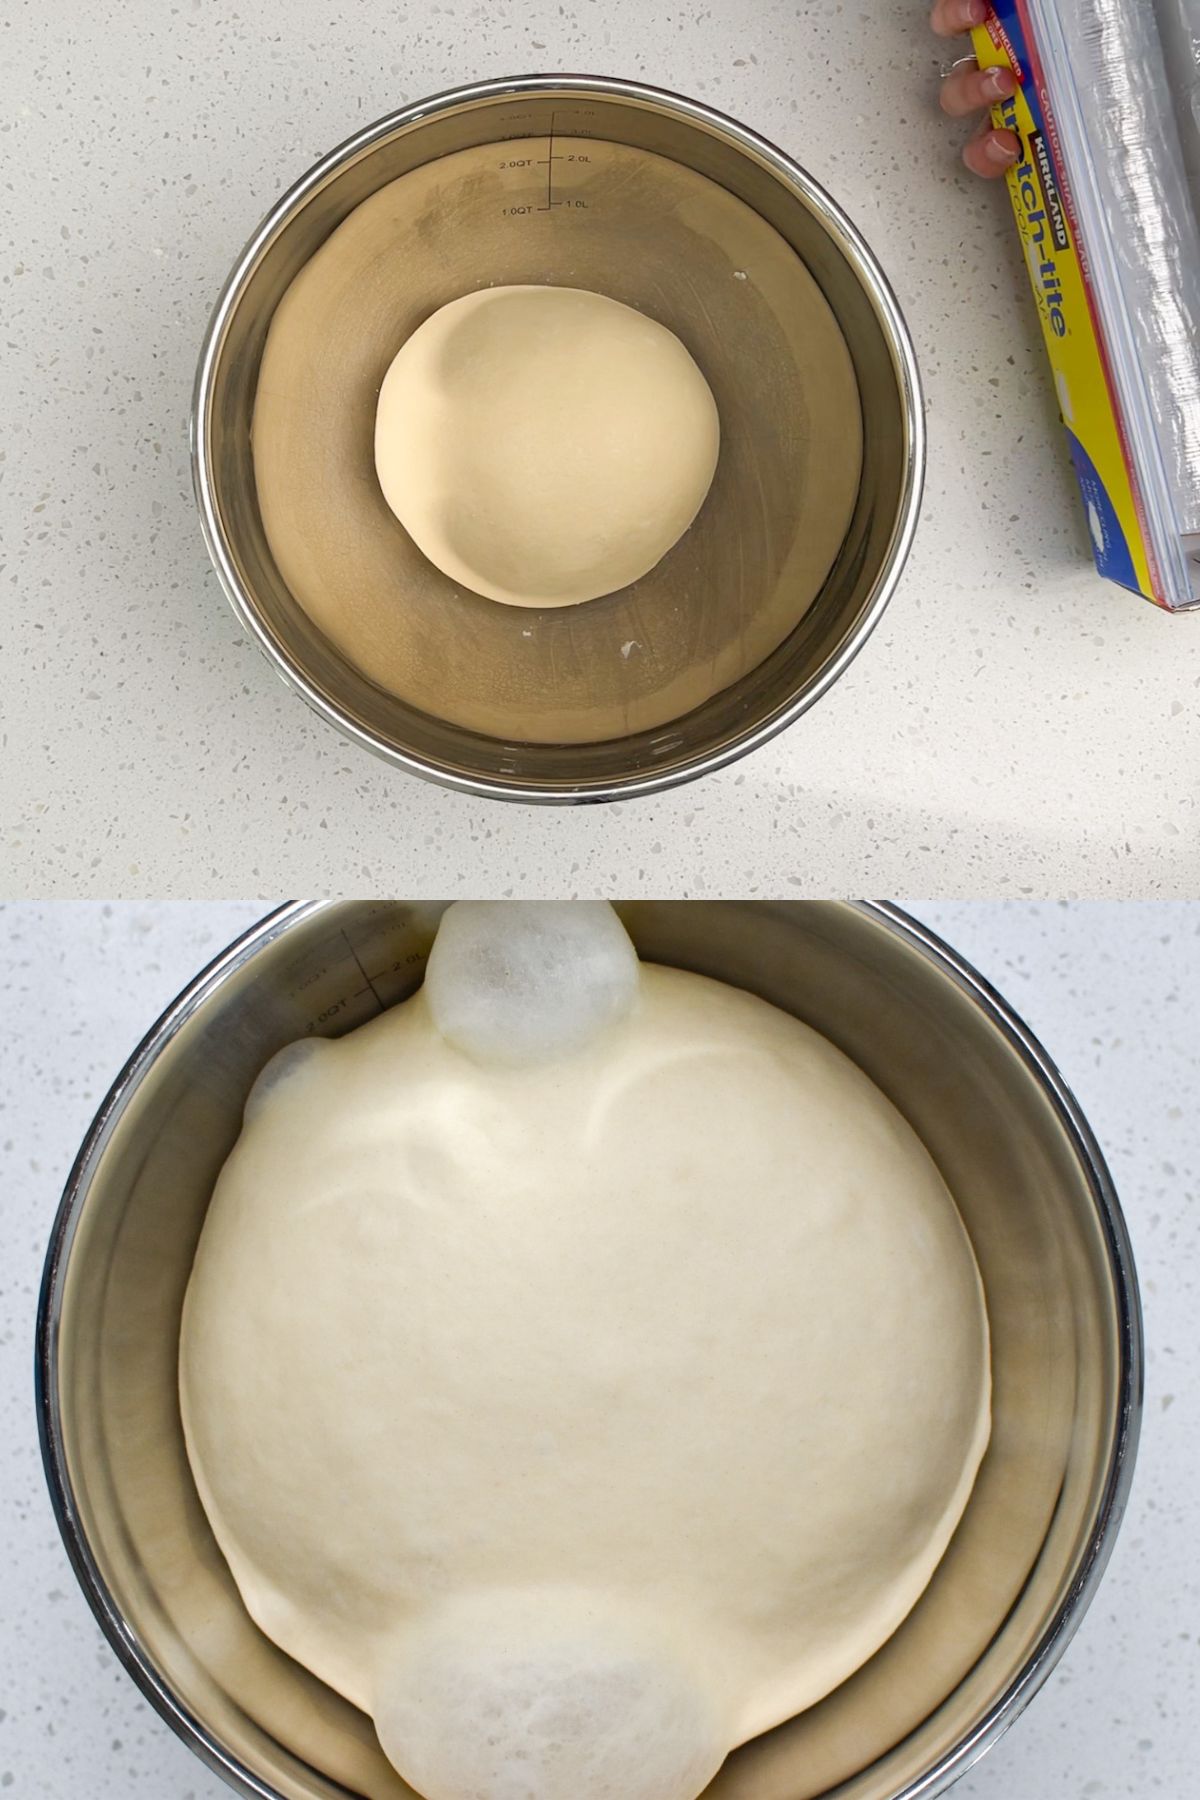 Bagel dough before and after it has risen in a bowl.